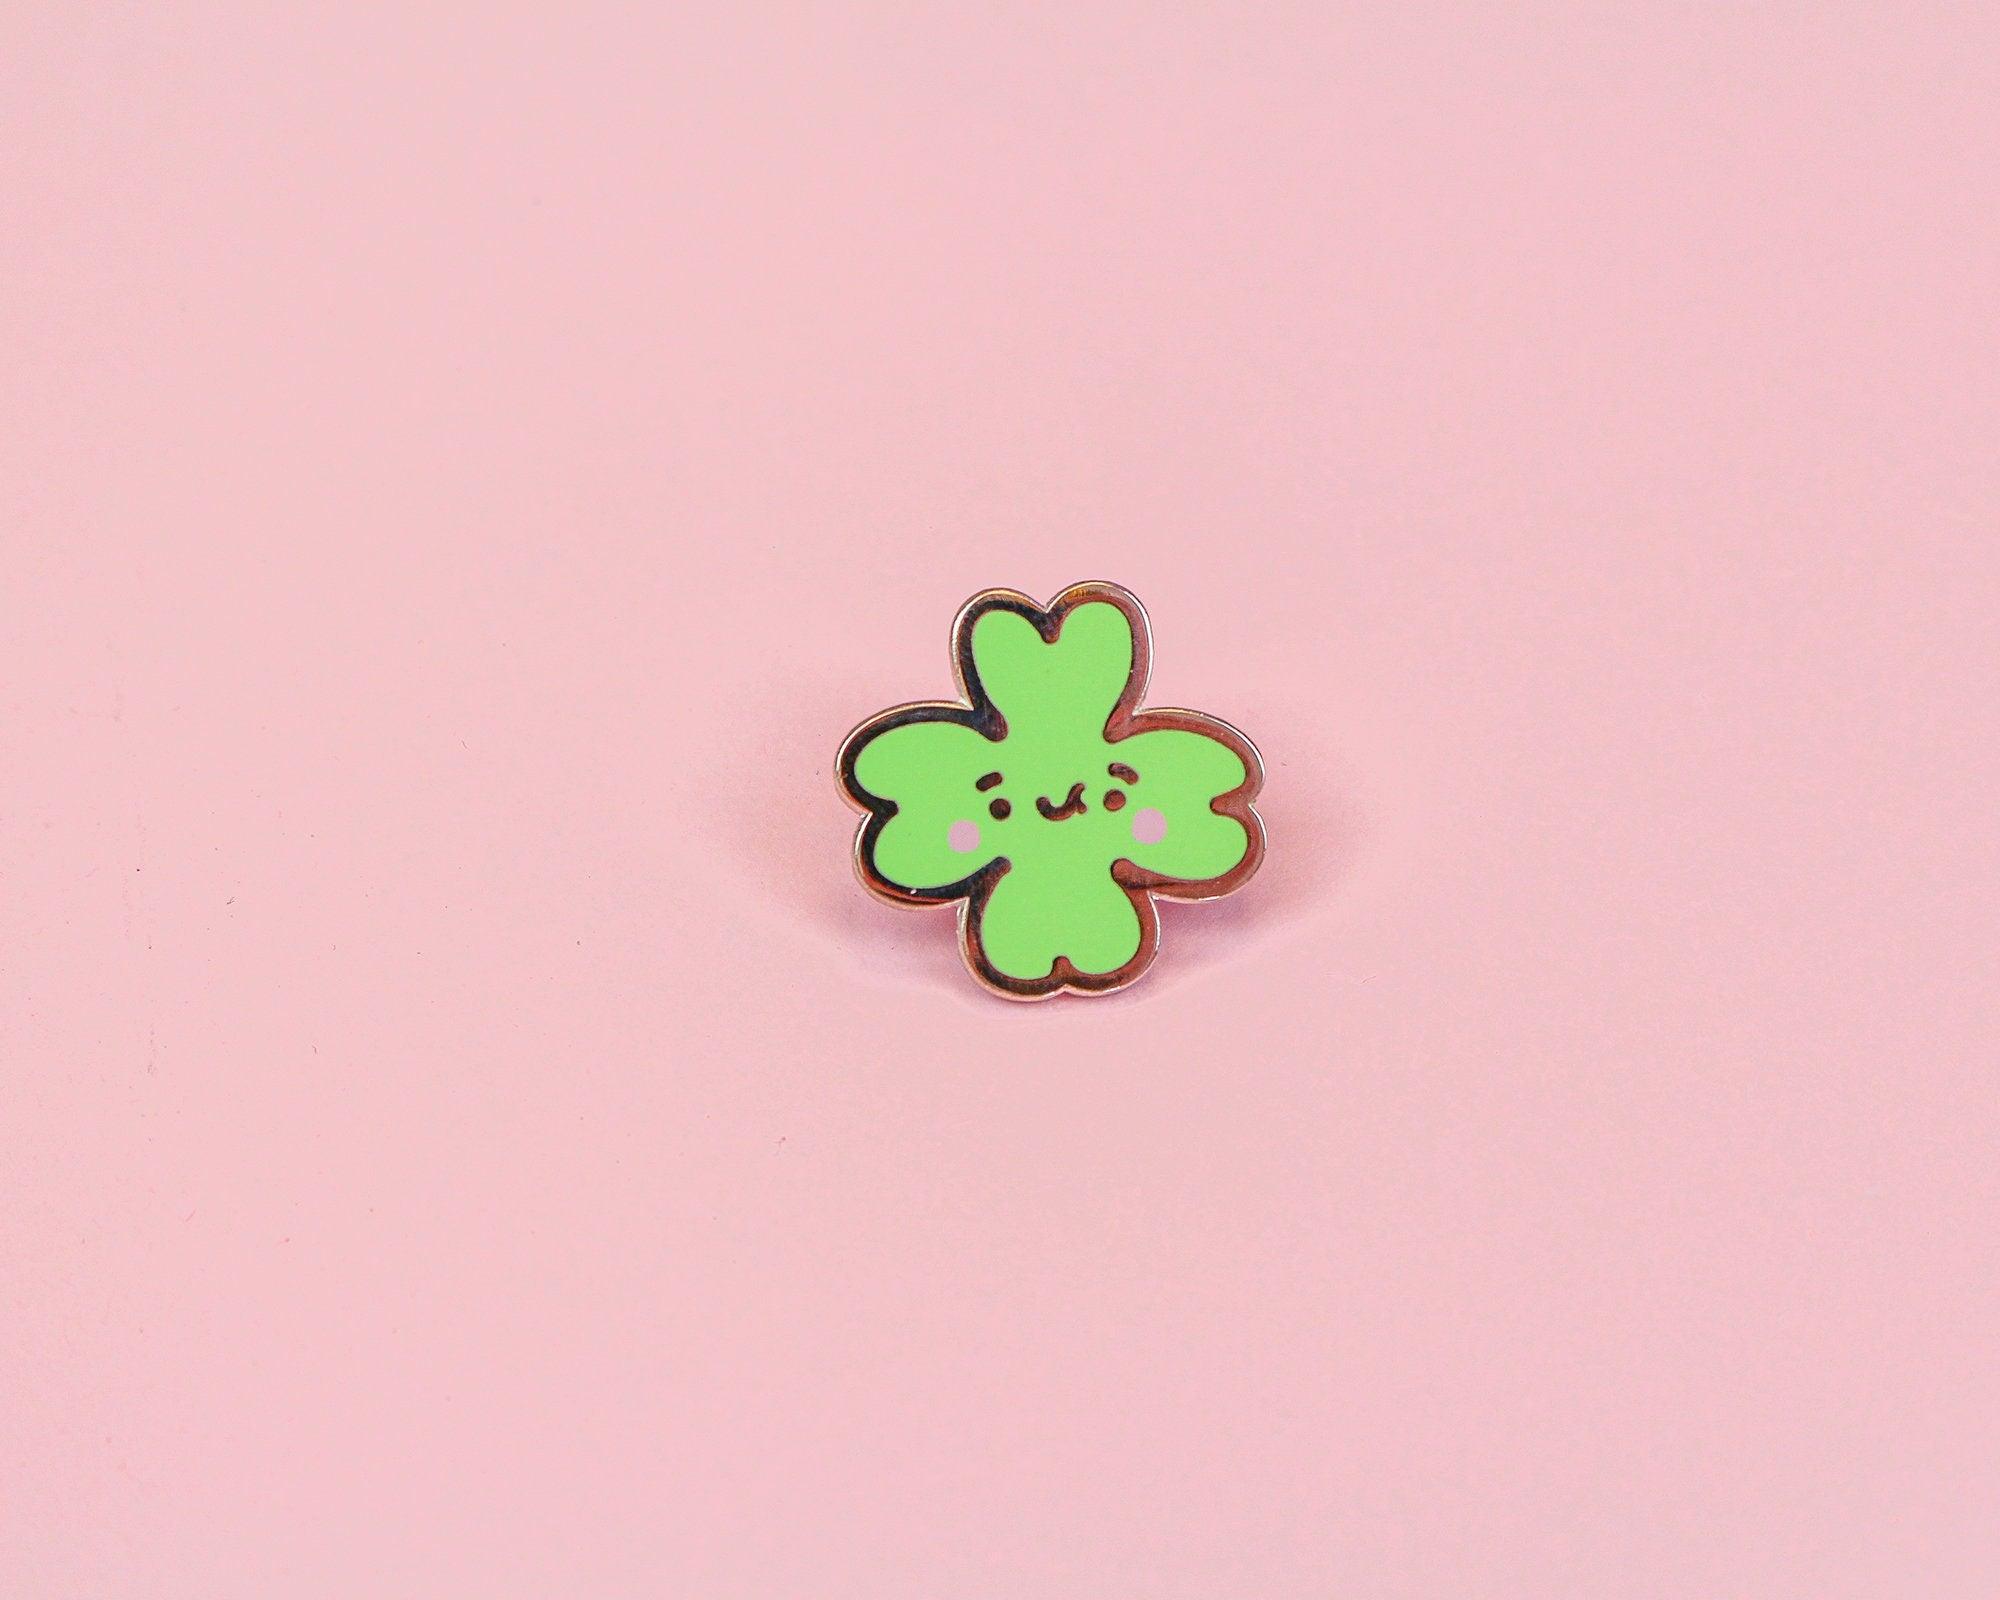 Lucky Charm Clover Enamel Pin - Adds luck to accessories - Ideal gift or personal accent, secondary